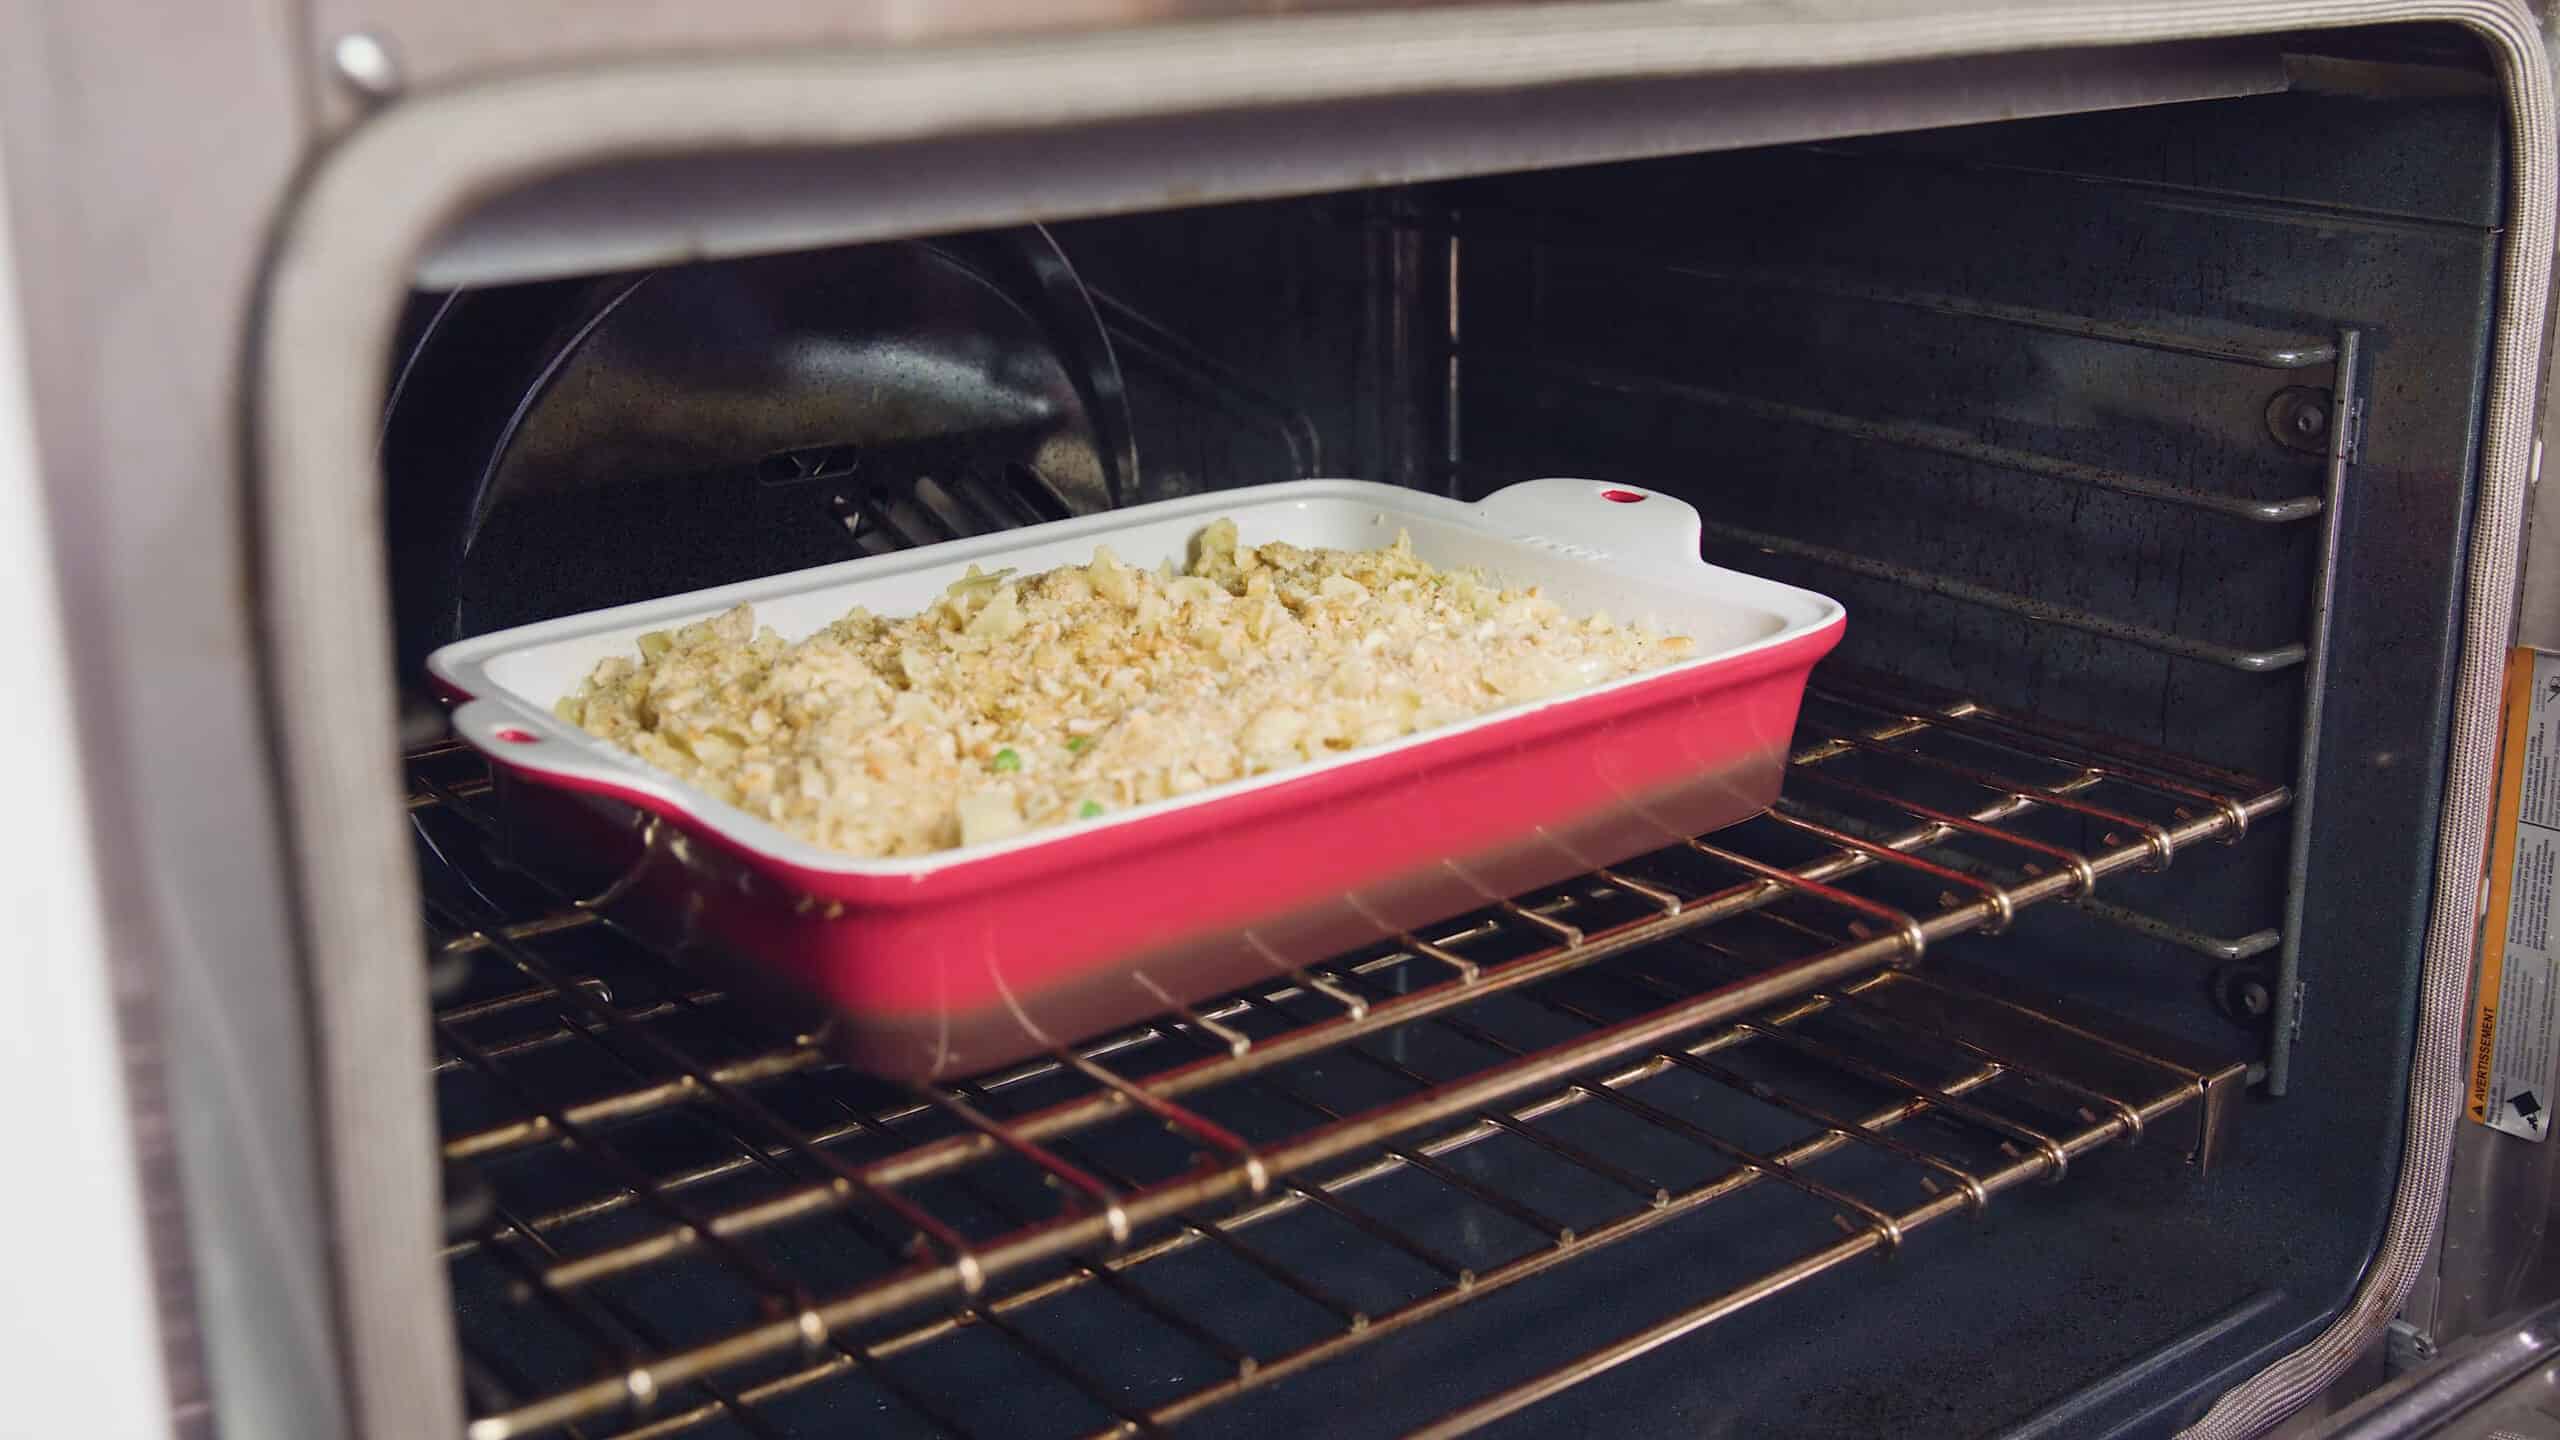 Angled view of an open oven with an enamel coated cast iron casserole dish filled with creamy chicken casserole mixture, egg noodles, and golden cracker topping all on a metal rack in the middle of the oven.